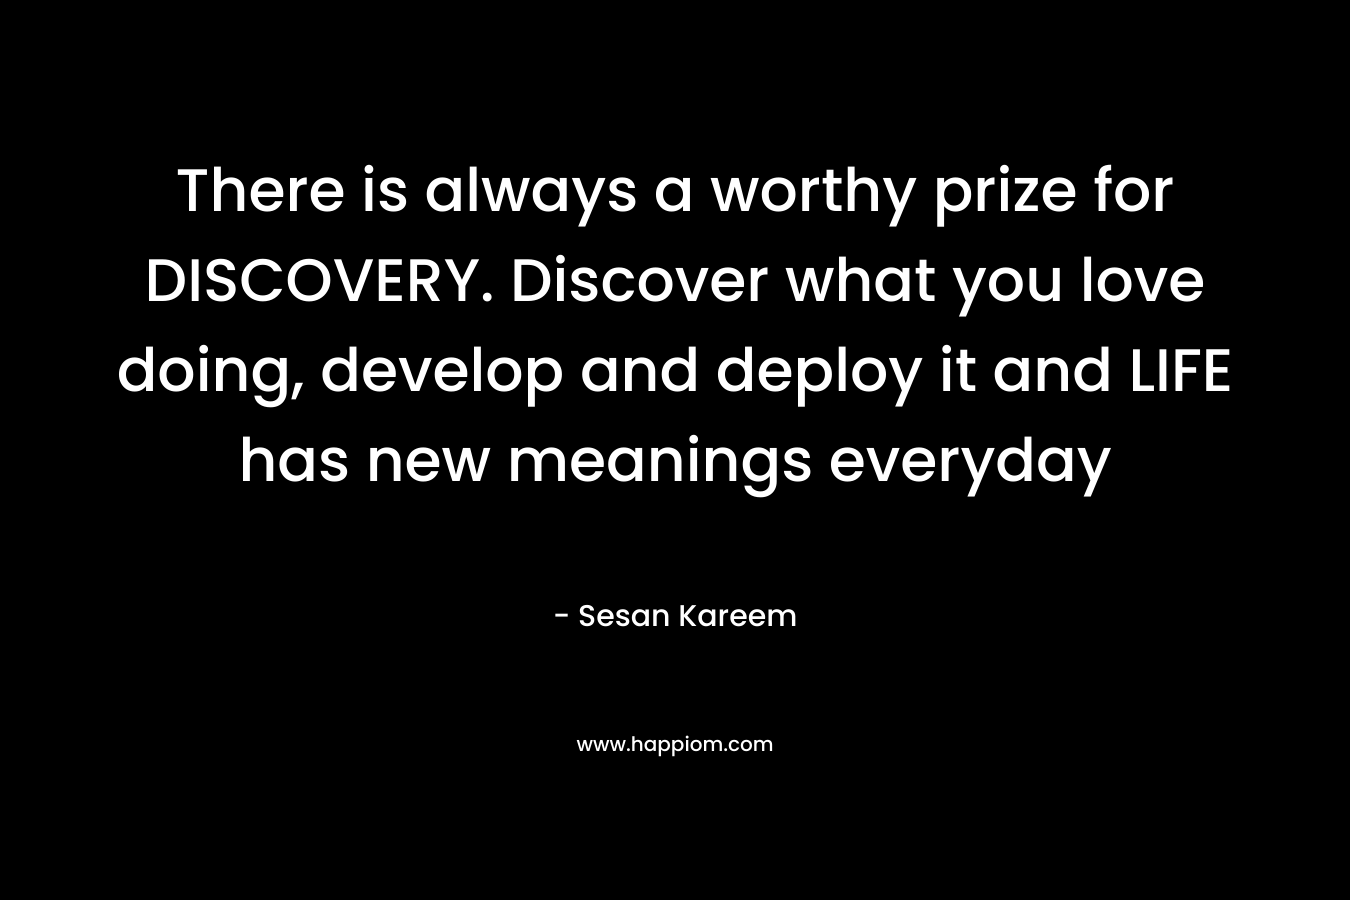 There is always a worthy prize for DISCOVERY. Discover what you love doing, develop and deploy it and LIFE has new meanings everyday – Sesan Kareem